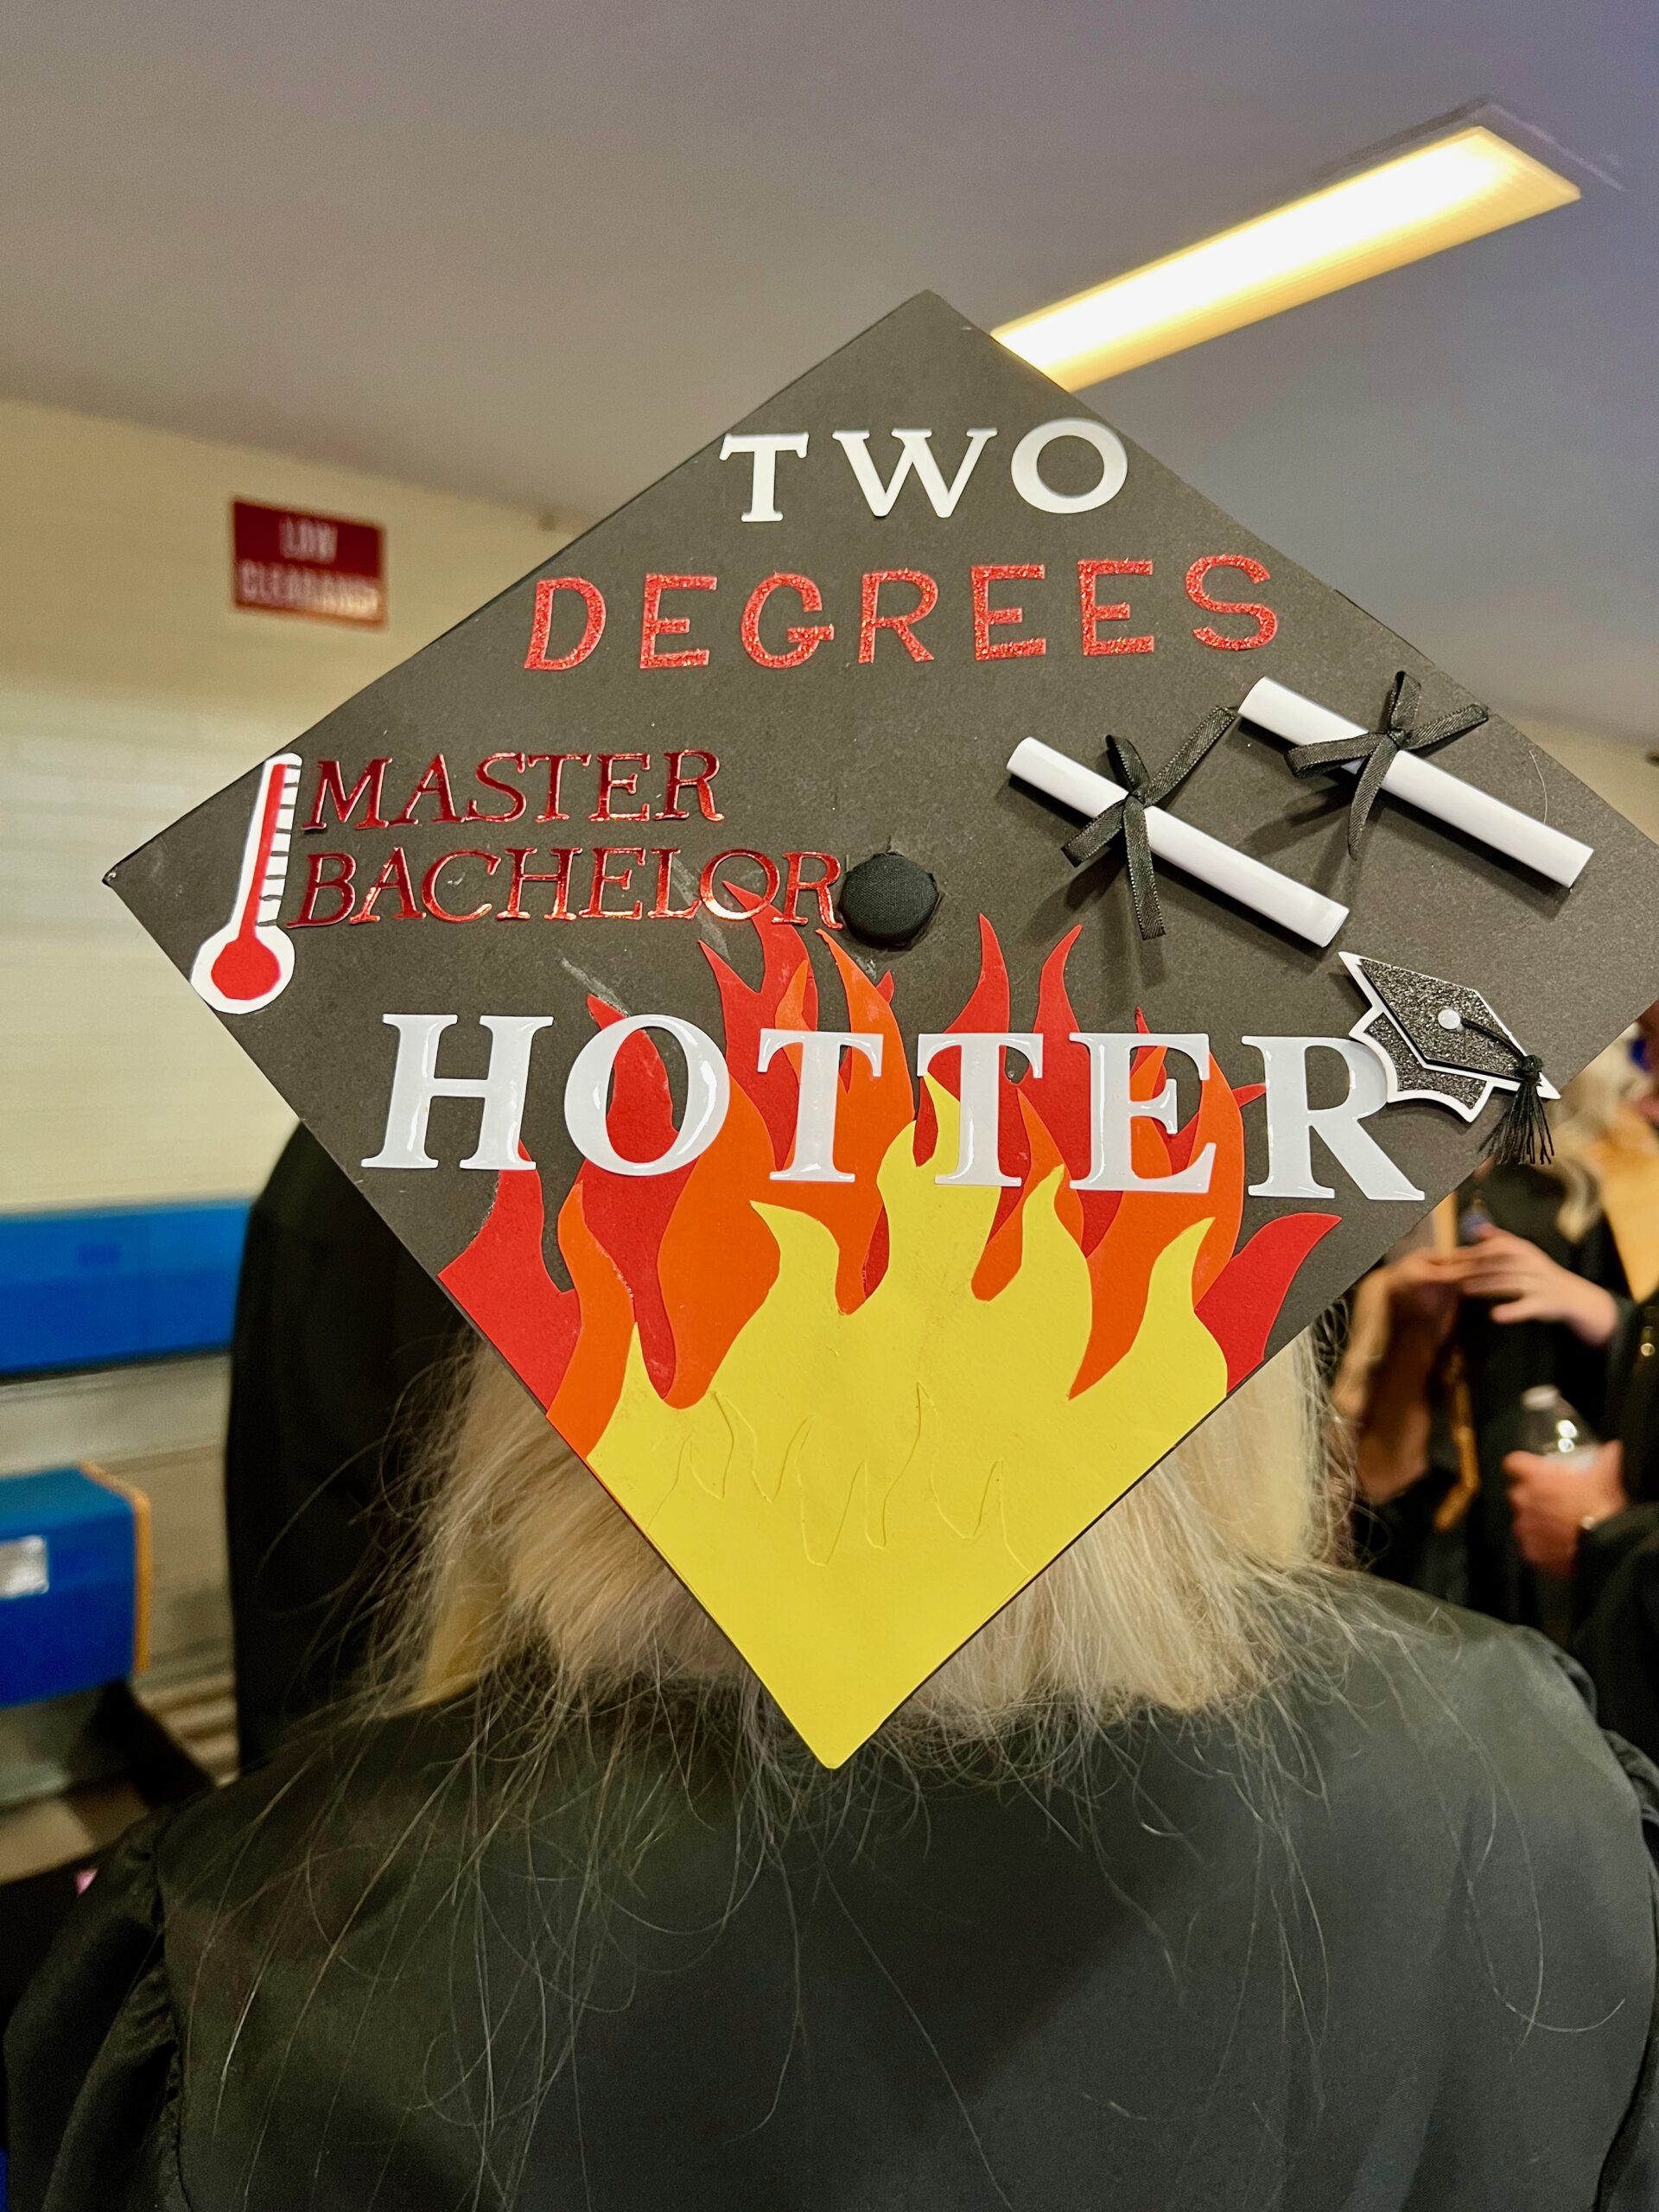 Decorated mortarboard reading "Two degrees hotter, bachelor's masters" with flames at the bottom corner